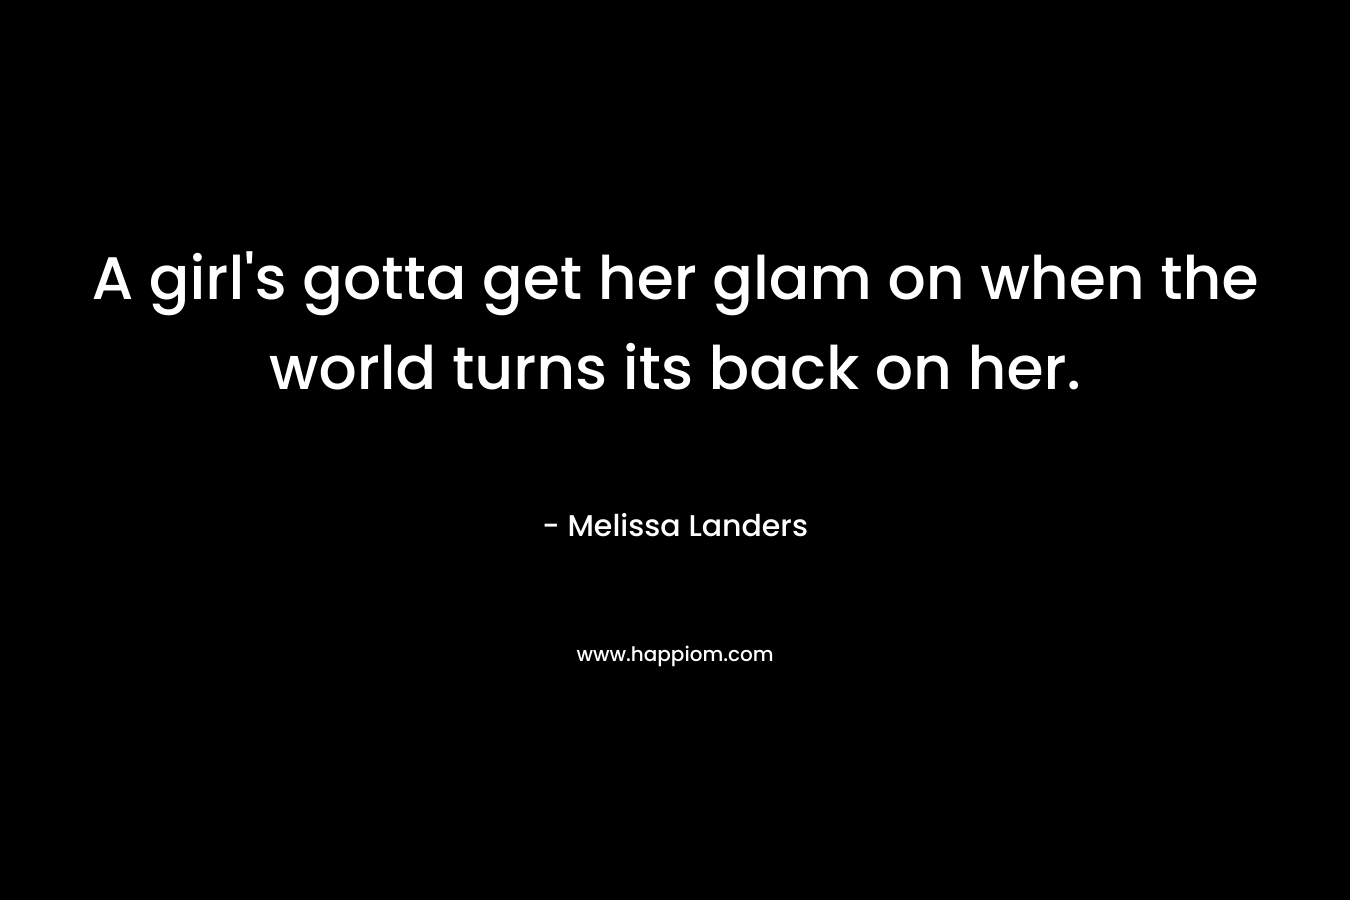 A girl’s gotta get her glam on when the world turns its back on her. – Melissa Landers